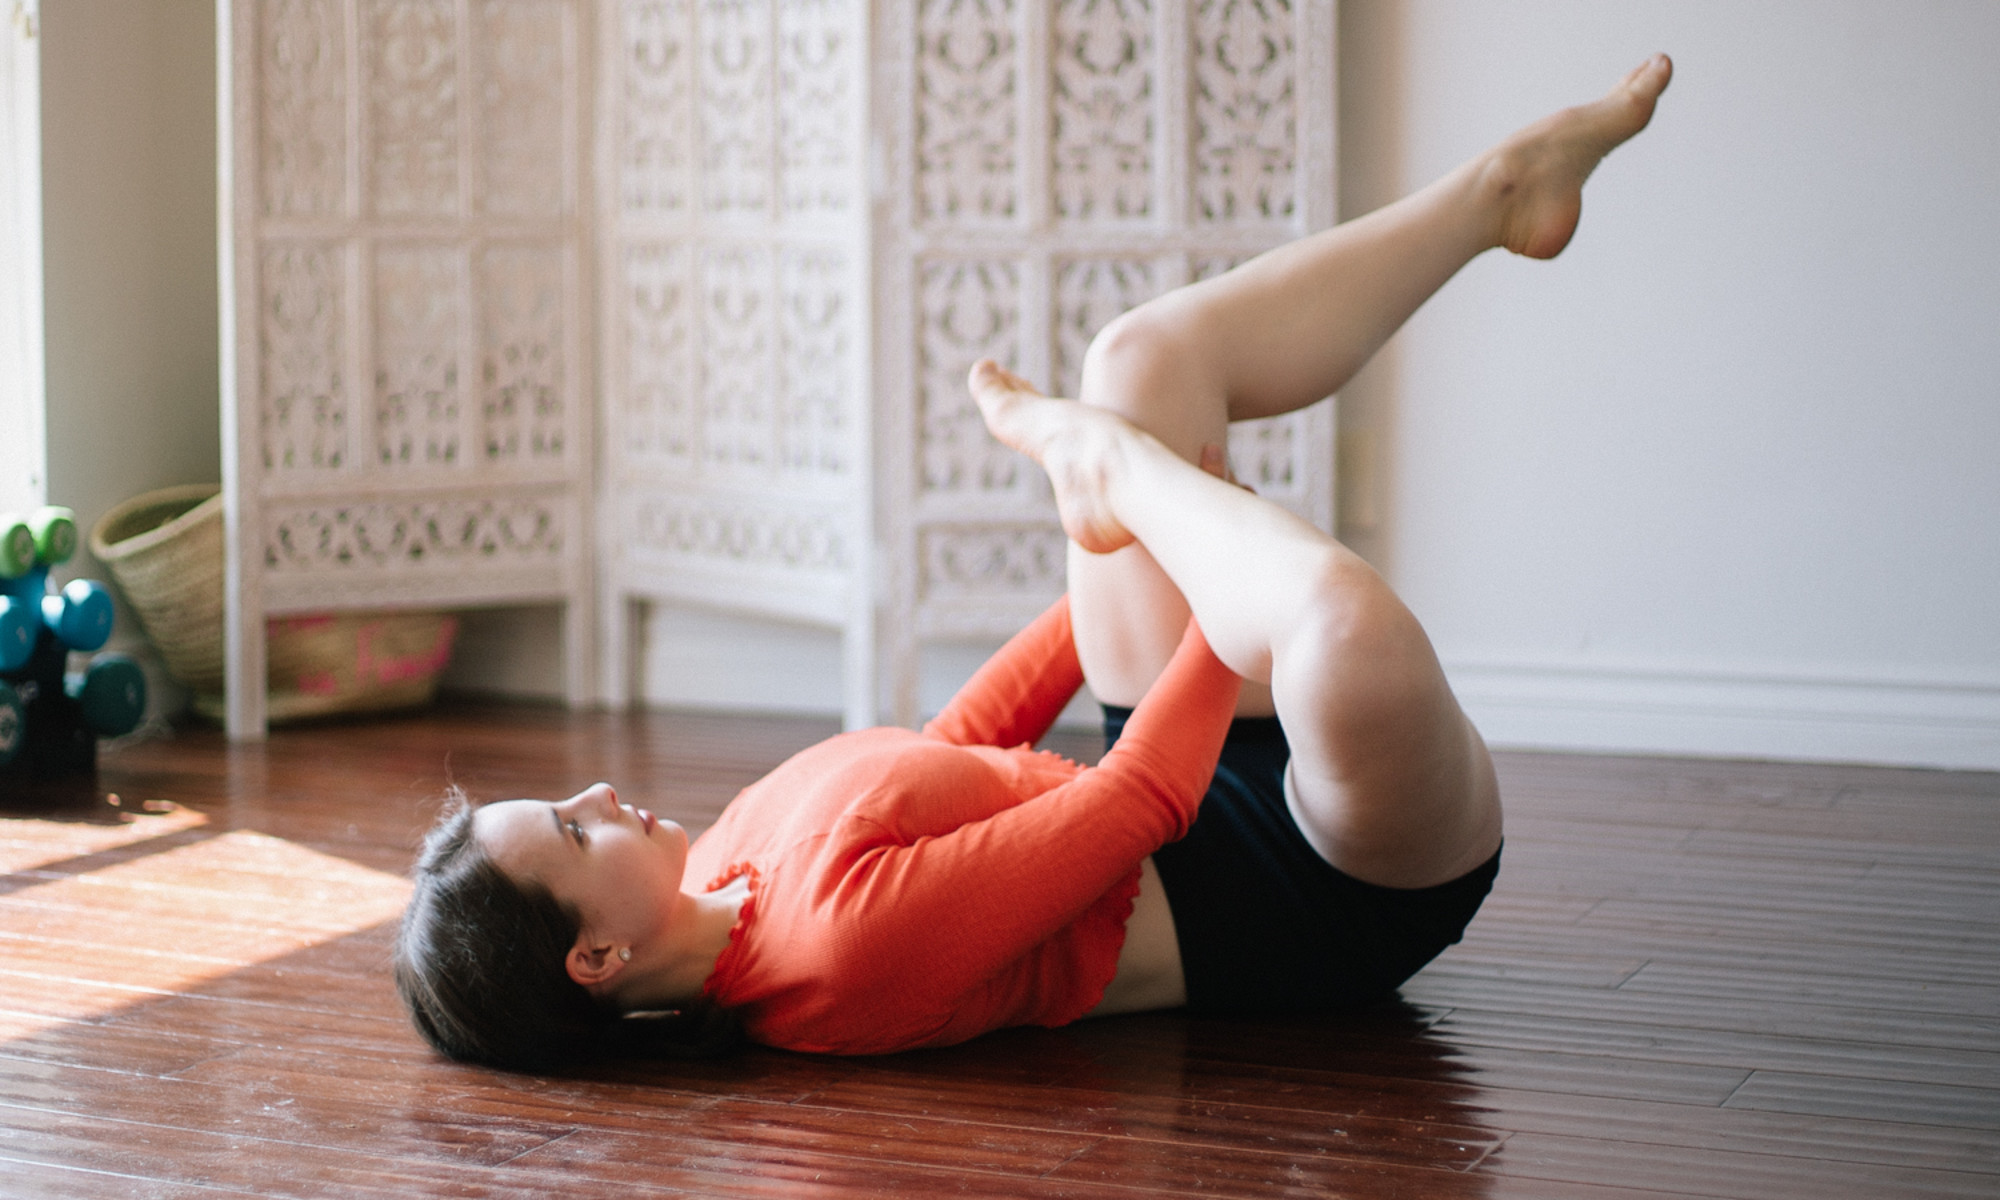 How to Stretch Your Legs: 12 Ways to Loosen Tight Muscles